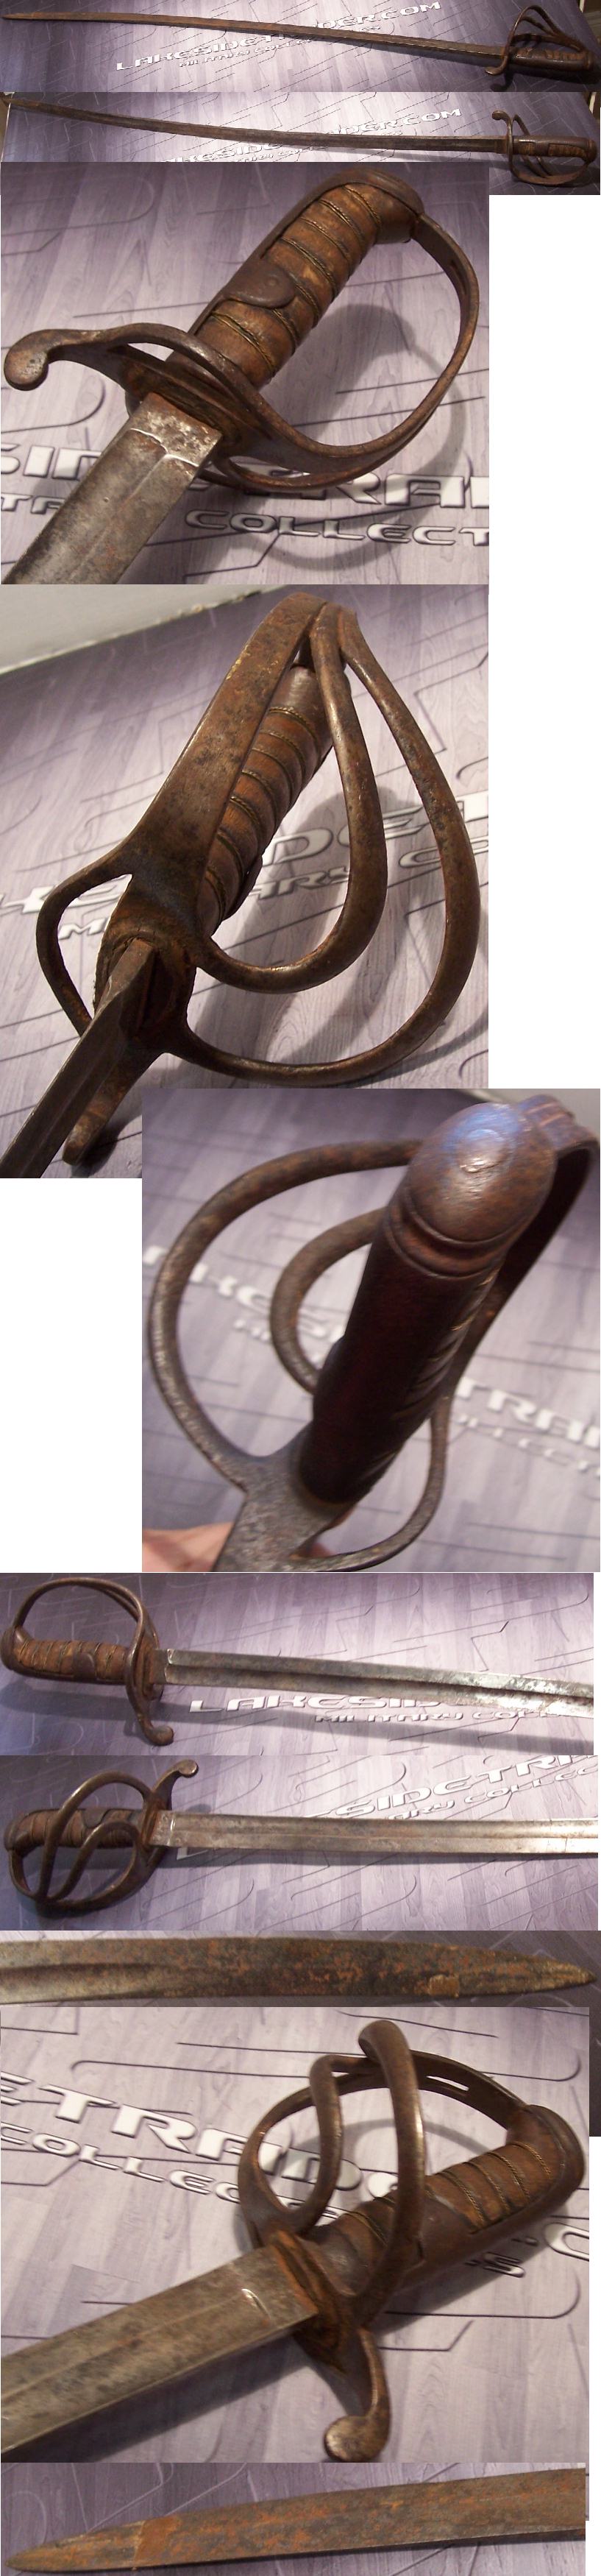 1832 Prussian Cavalry Saber